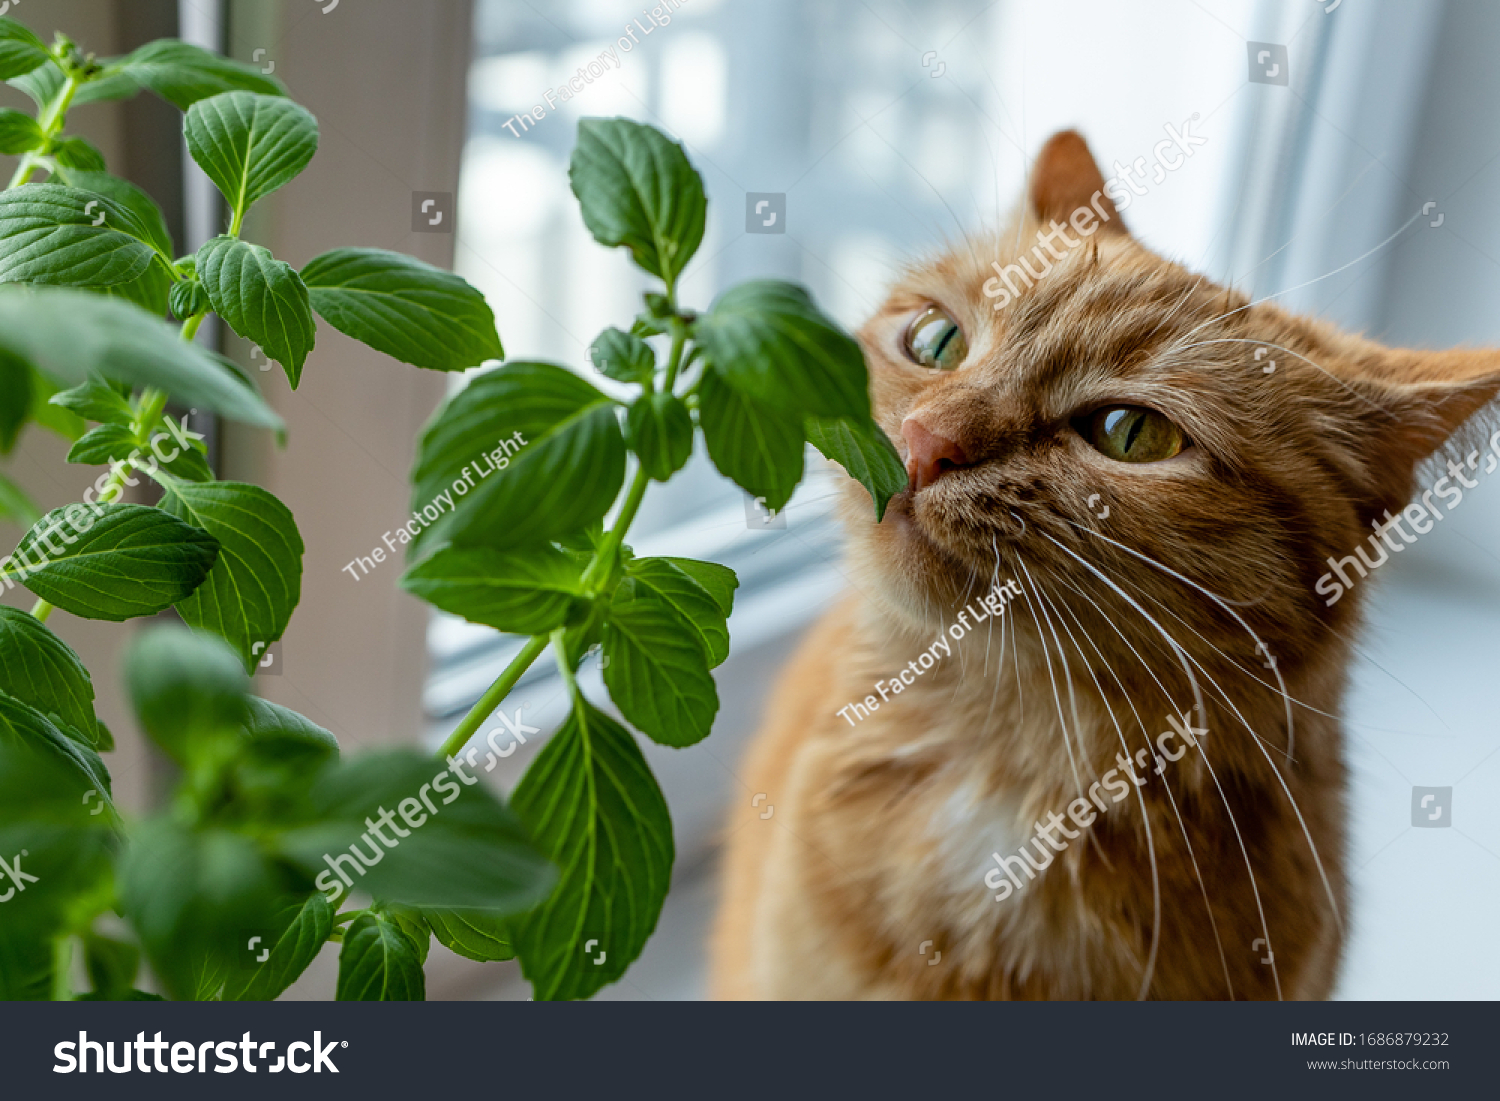 Ginger cat sniffs basil growing on a windowsill, indoors. #1686879232